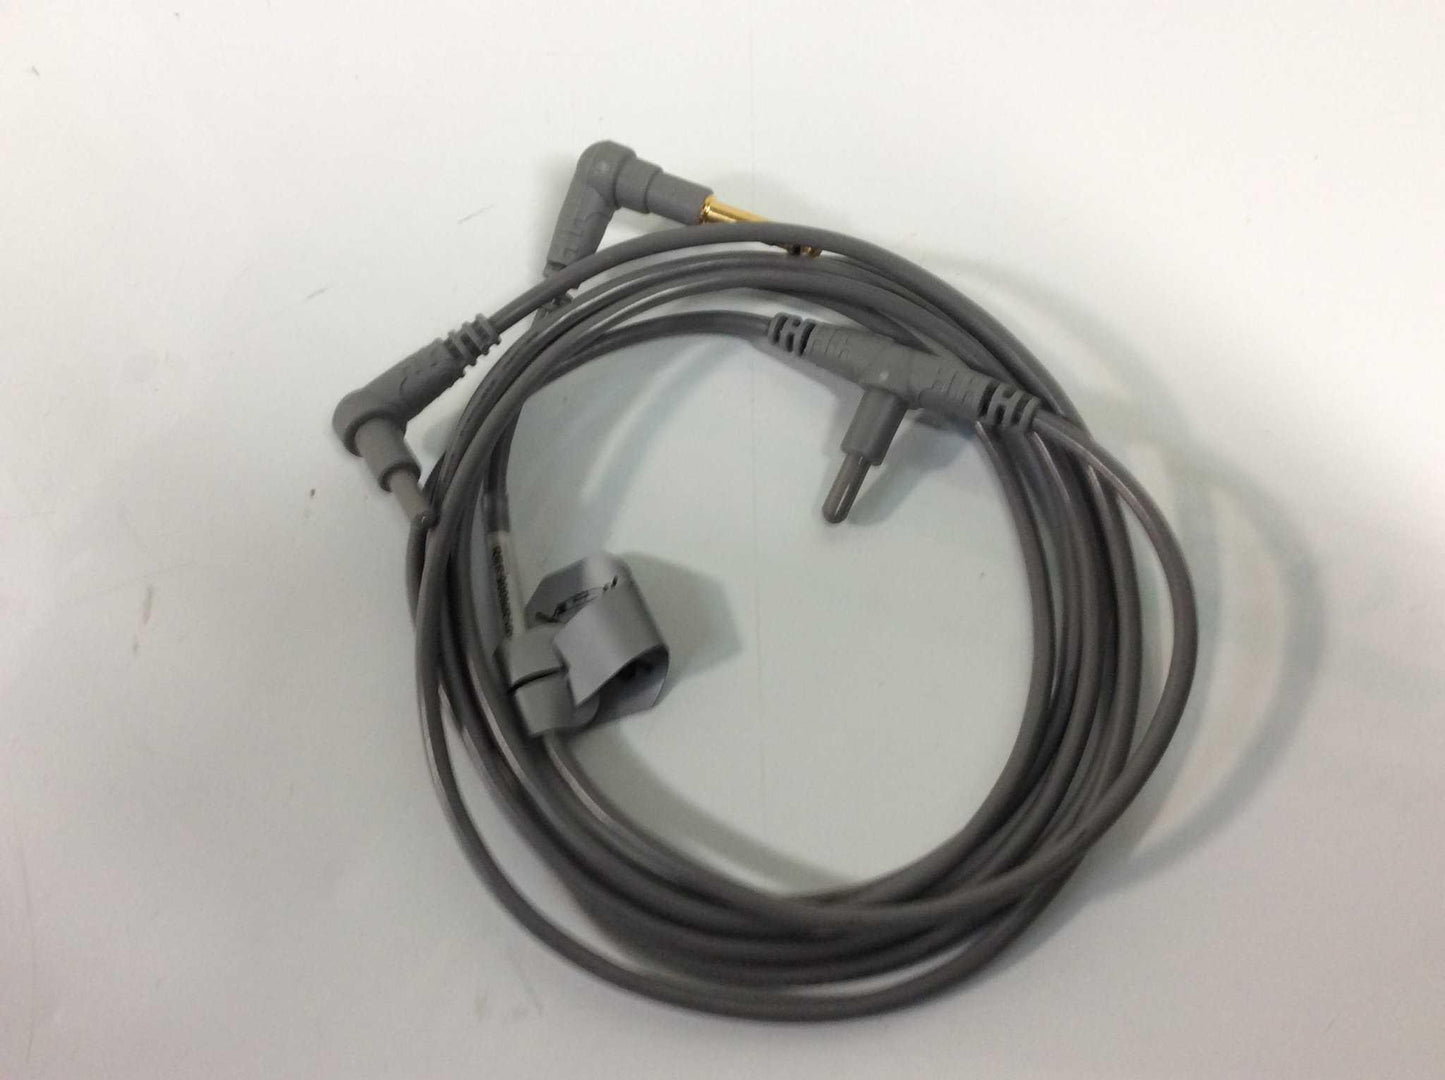 NEW Open Box Fisher & Paykel 900MR561 Airway Temperature Probe Warranty FREE Shipping - MBR Medicals